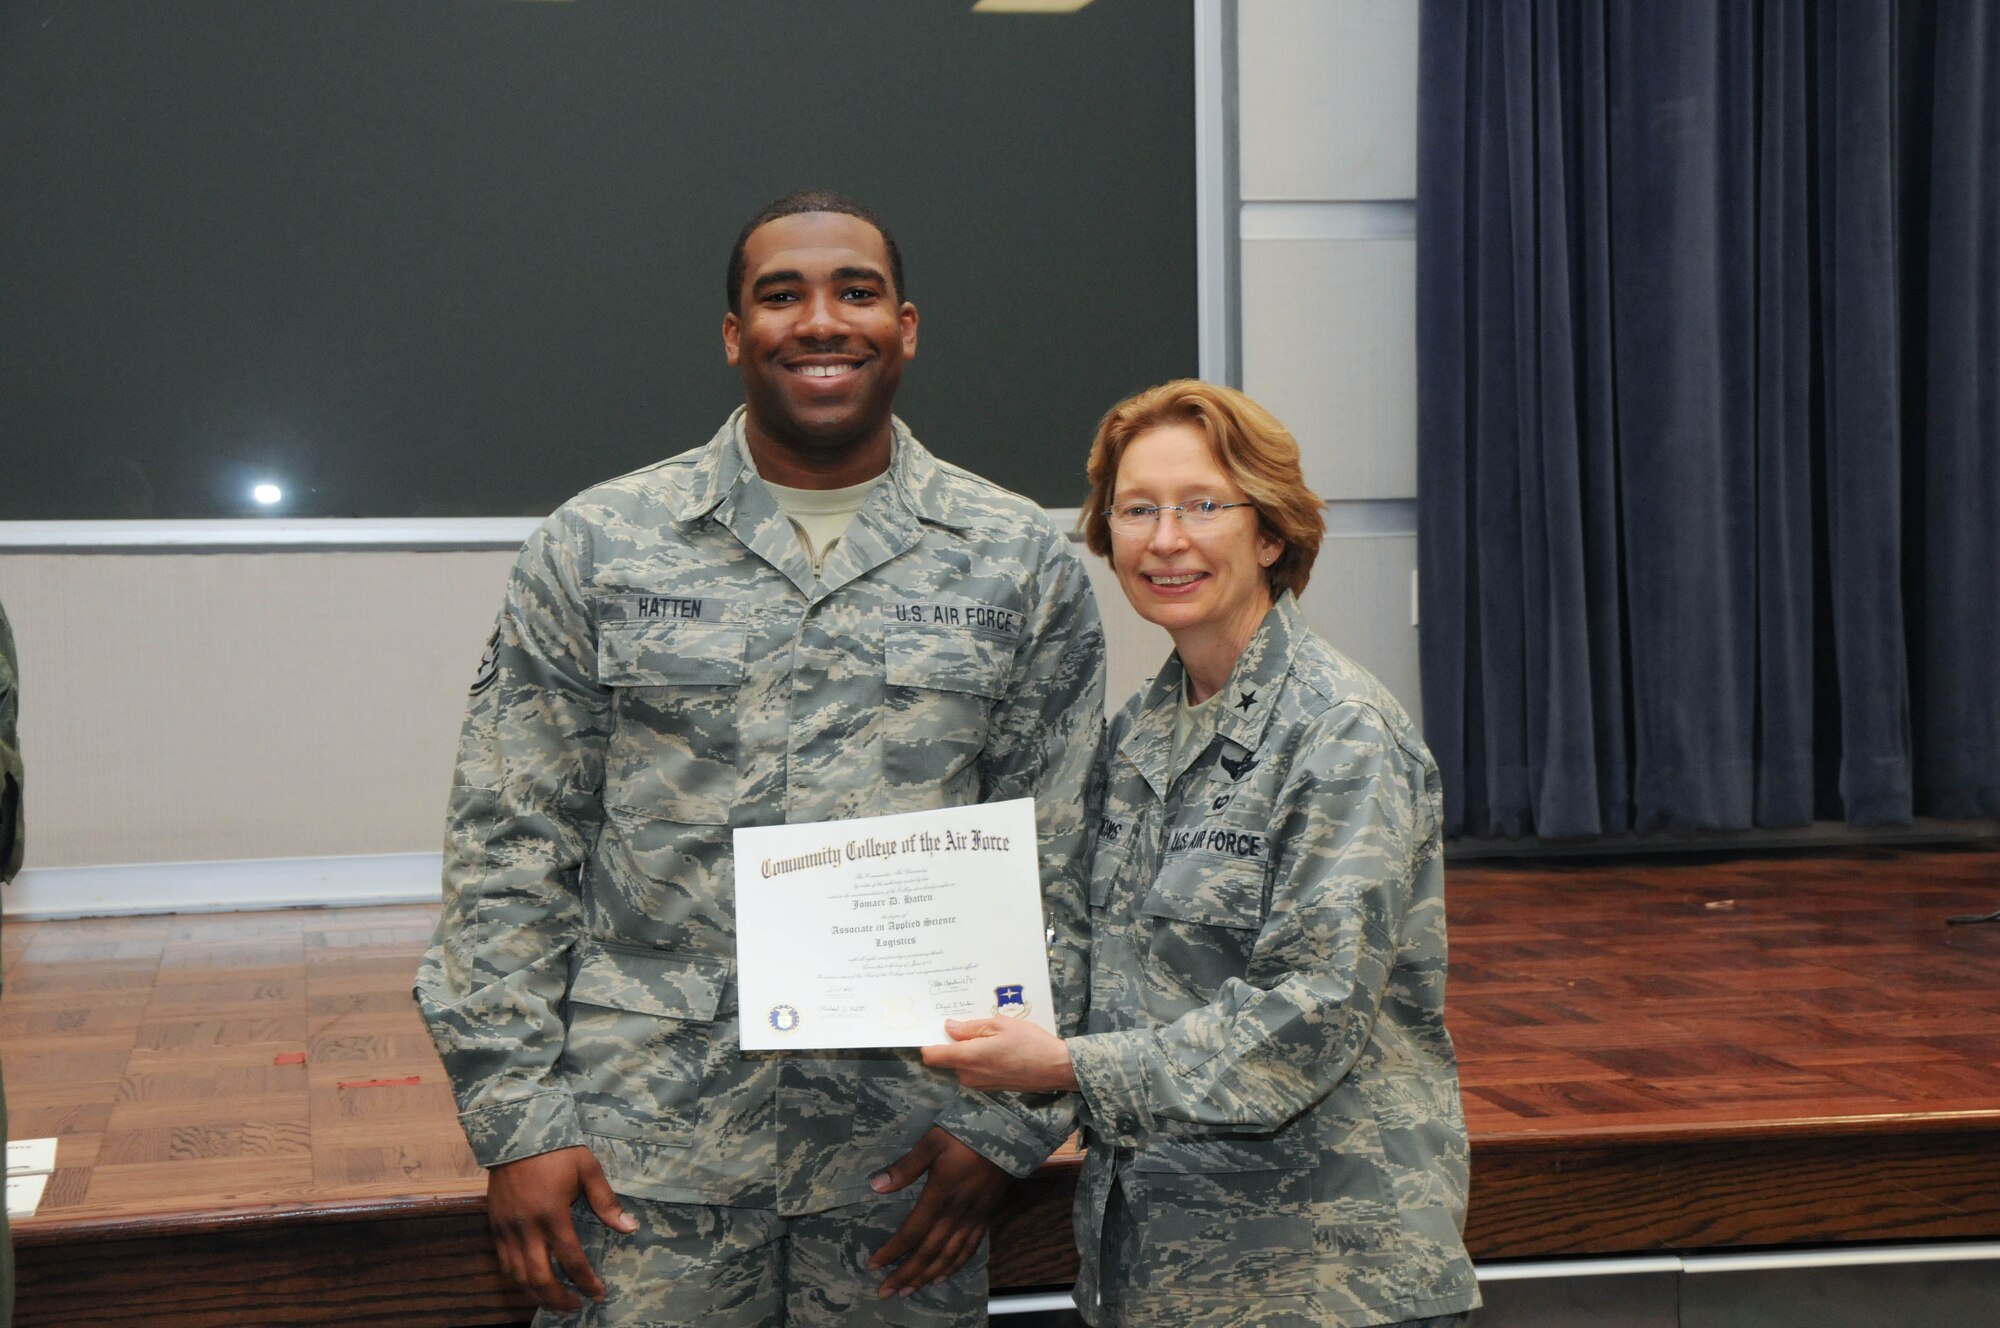 U.S. Air Force Staff Sgt. Jomarr Hatten, left, a member of the 166th Logistics Readiness Squadron, 166th Airlift Wing, receives a certificate from Brig. Gen. Carol Timmons, assistant adjutant general for air, Delaware National Guard to recognize Hatten’s attainment of a Community College of the Air Force associate of applied science degree in logistics a CCAF Class of October 2013 graduation ceremony held Nov. 3, 2013 at the New Castle Air National Guard Base, Del. (U.S. Air National Guard photo by Tech. Sgt. Robin Meredith)